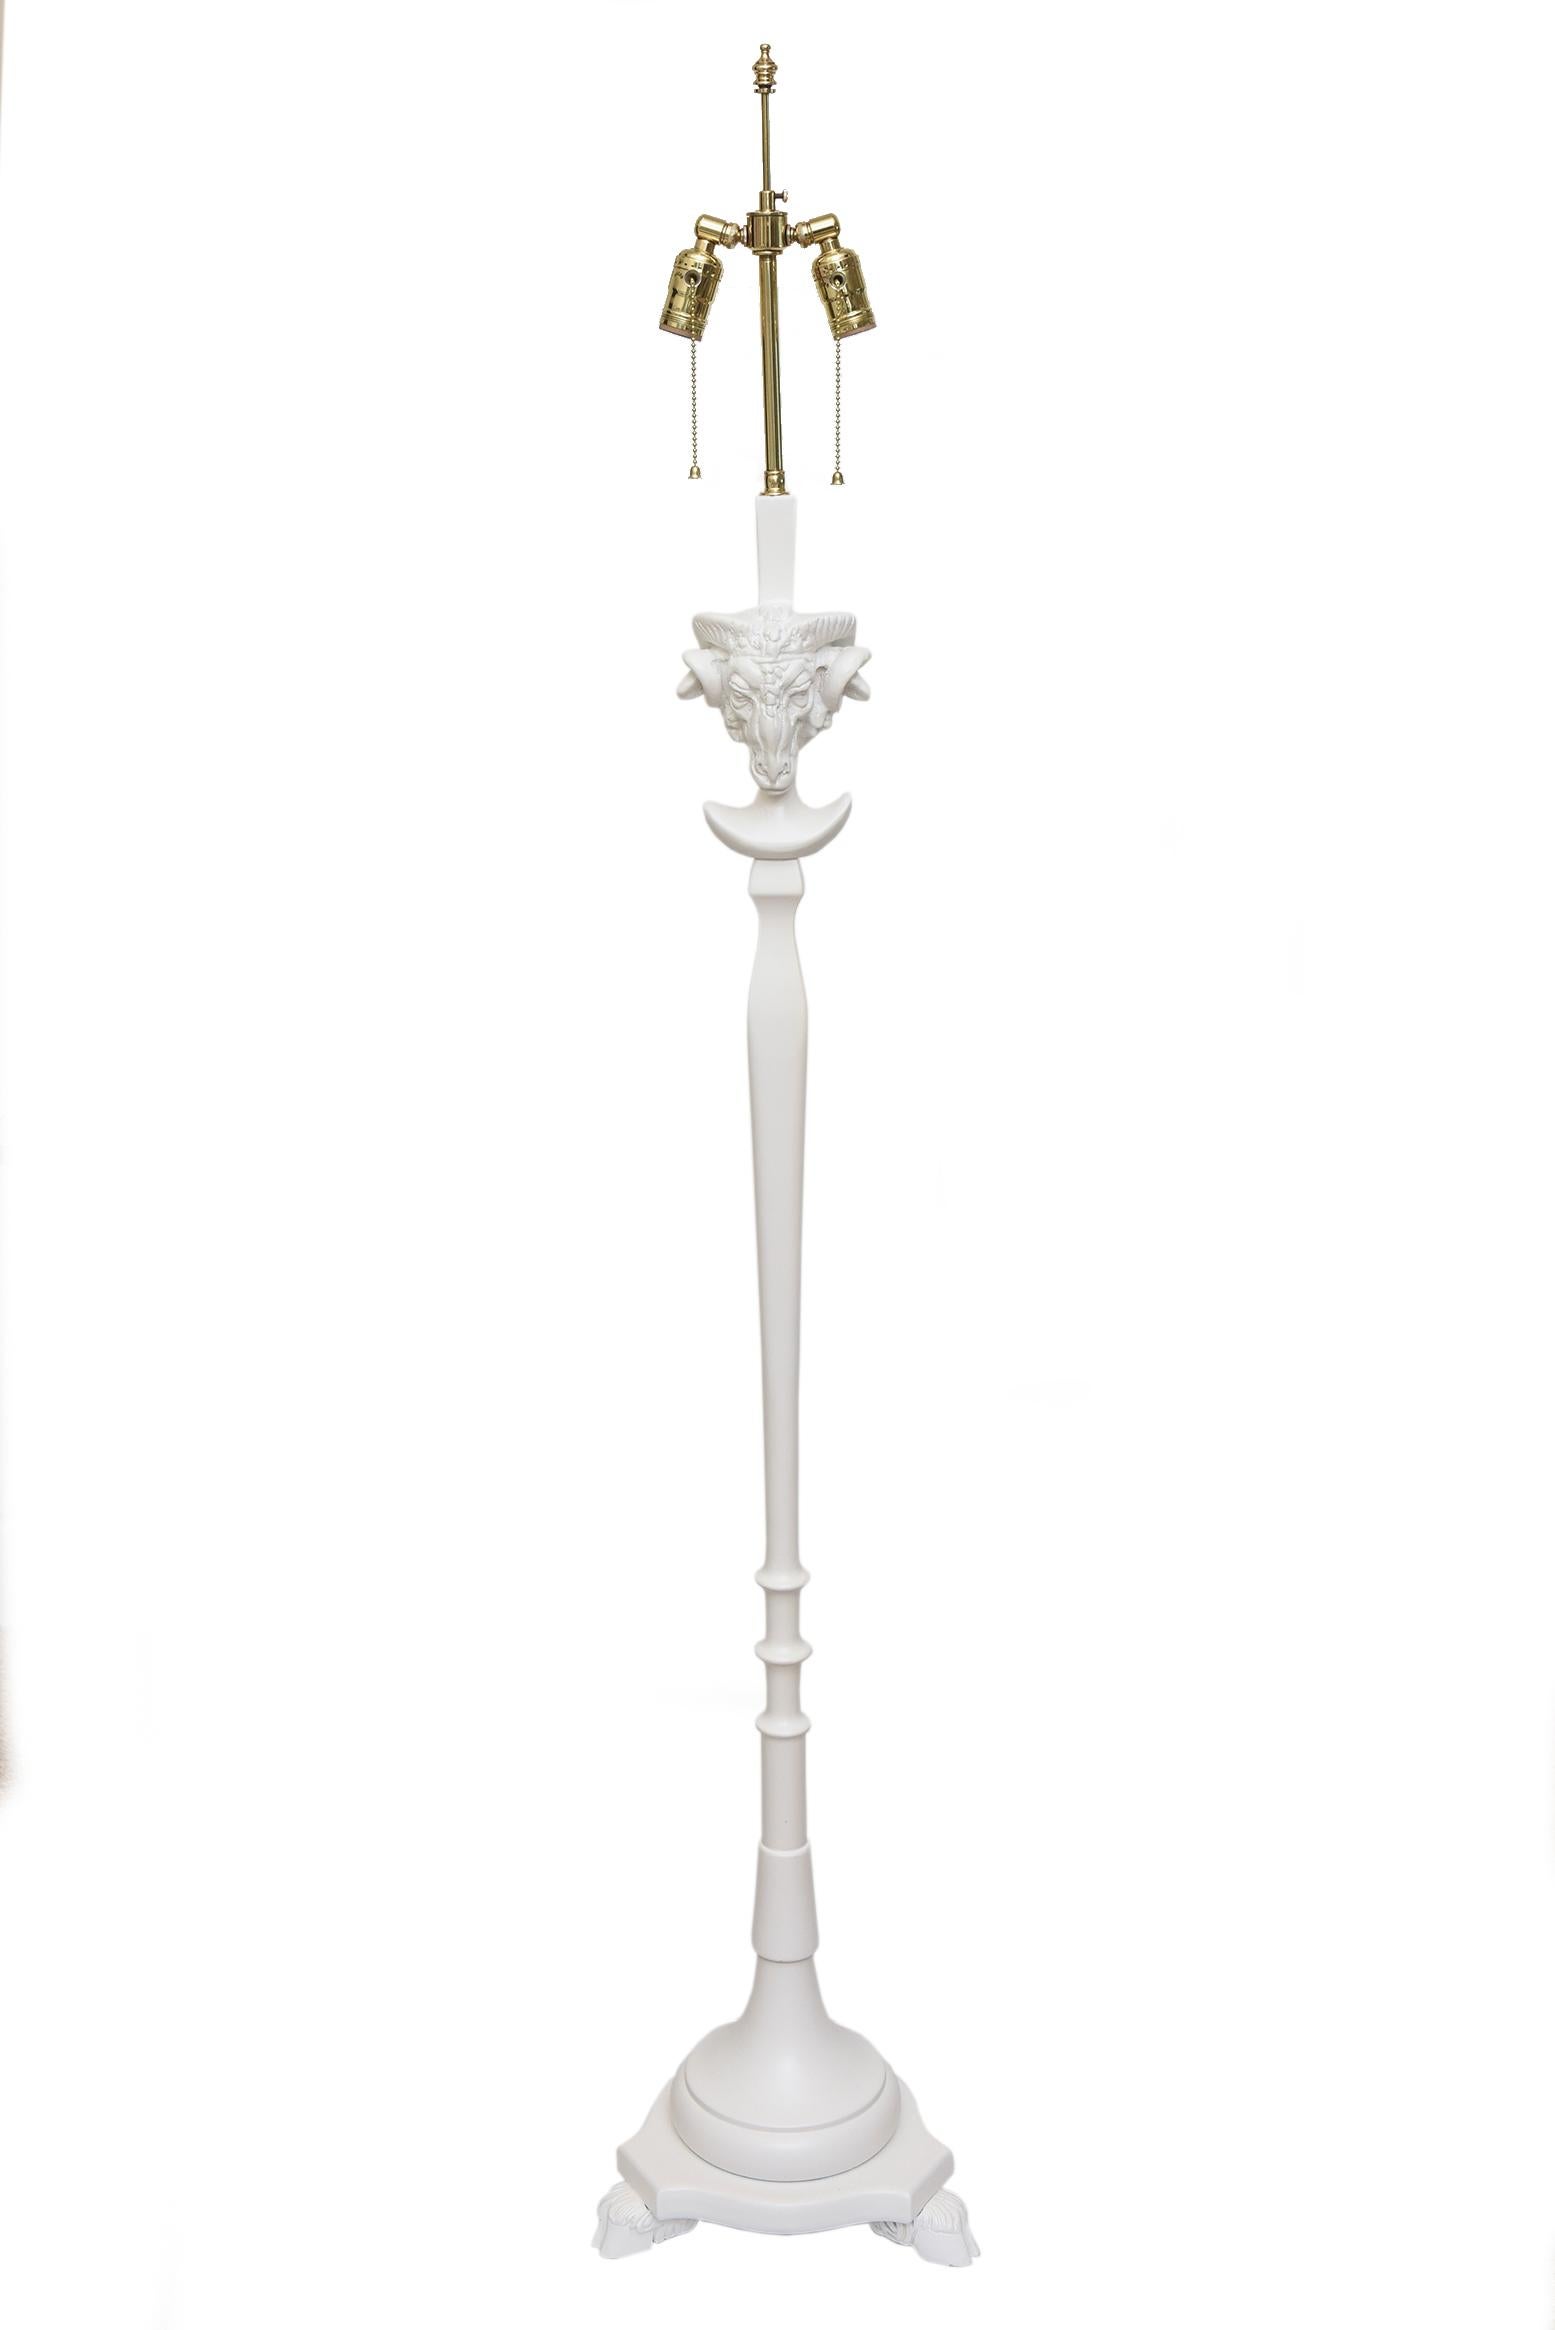 This single fully restored vintage Sirmos rams head floor lamp has been newly white semi satin painted over the wood. All of the original vintage brass fittings have all been meticulously polished and the lamps was rewired with a white cord. The